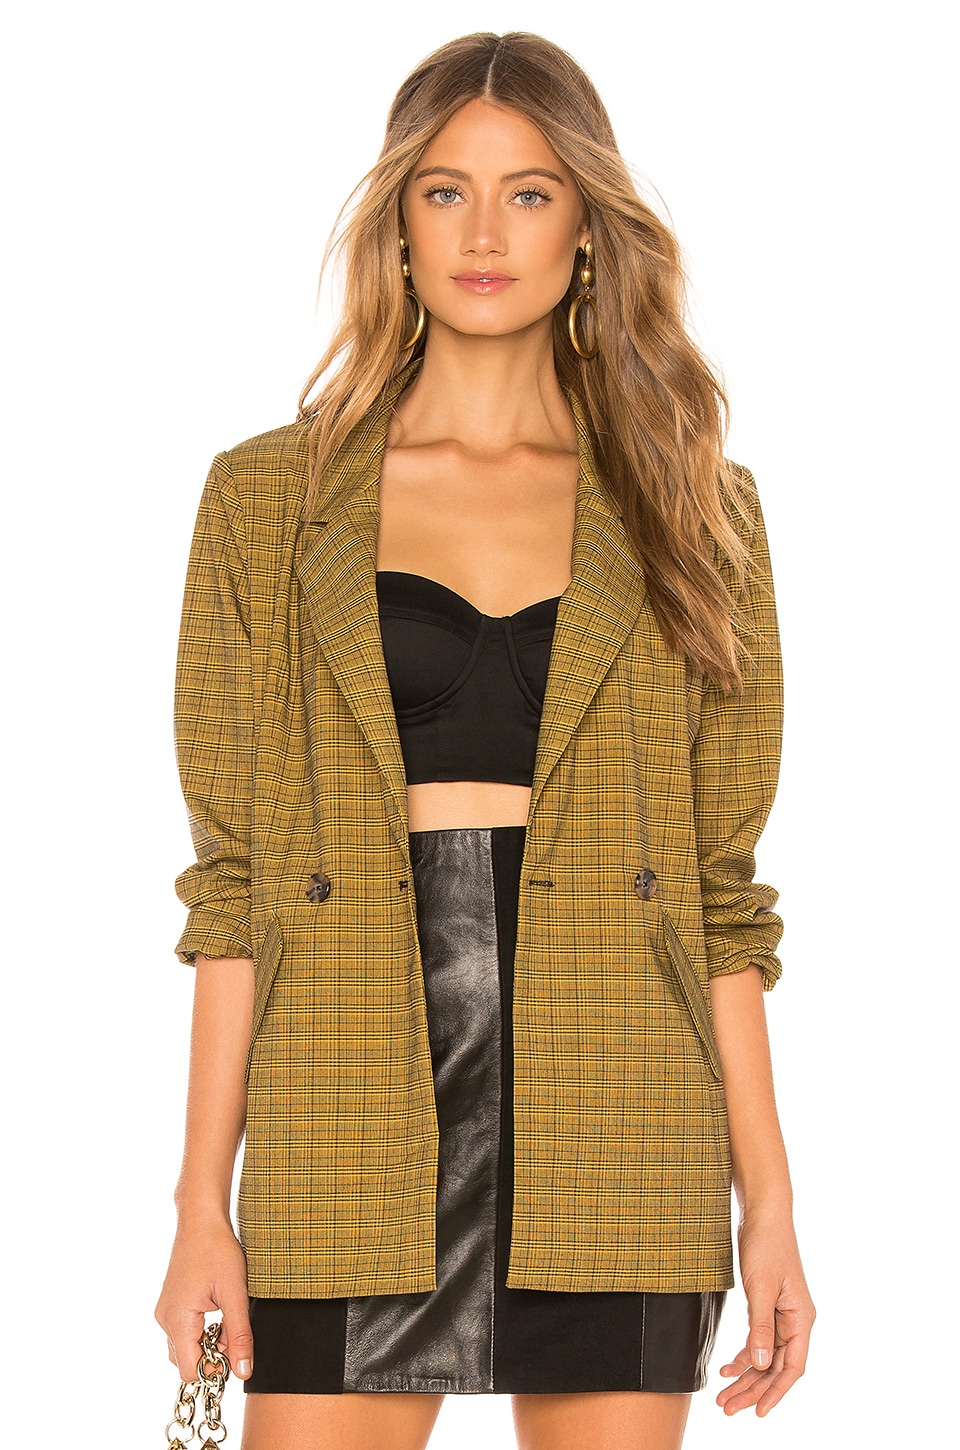 L'Academie The Hanna Jacket in Yellow Plaid